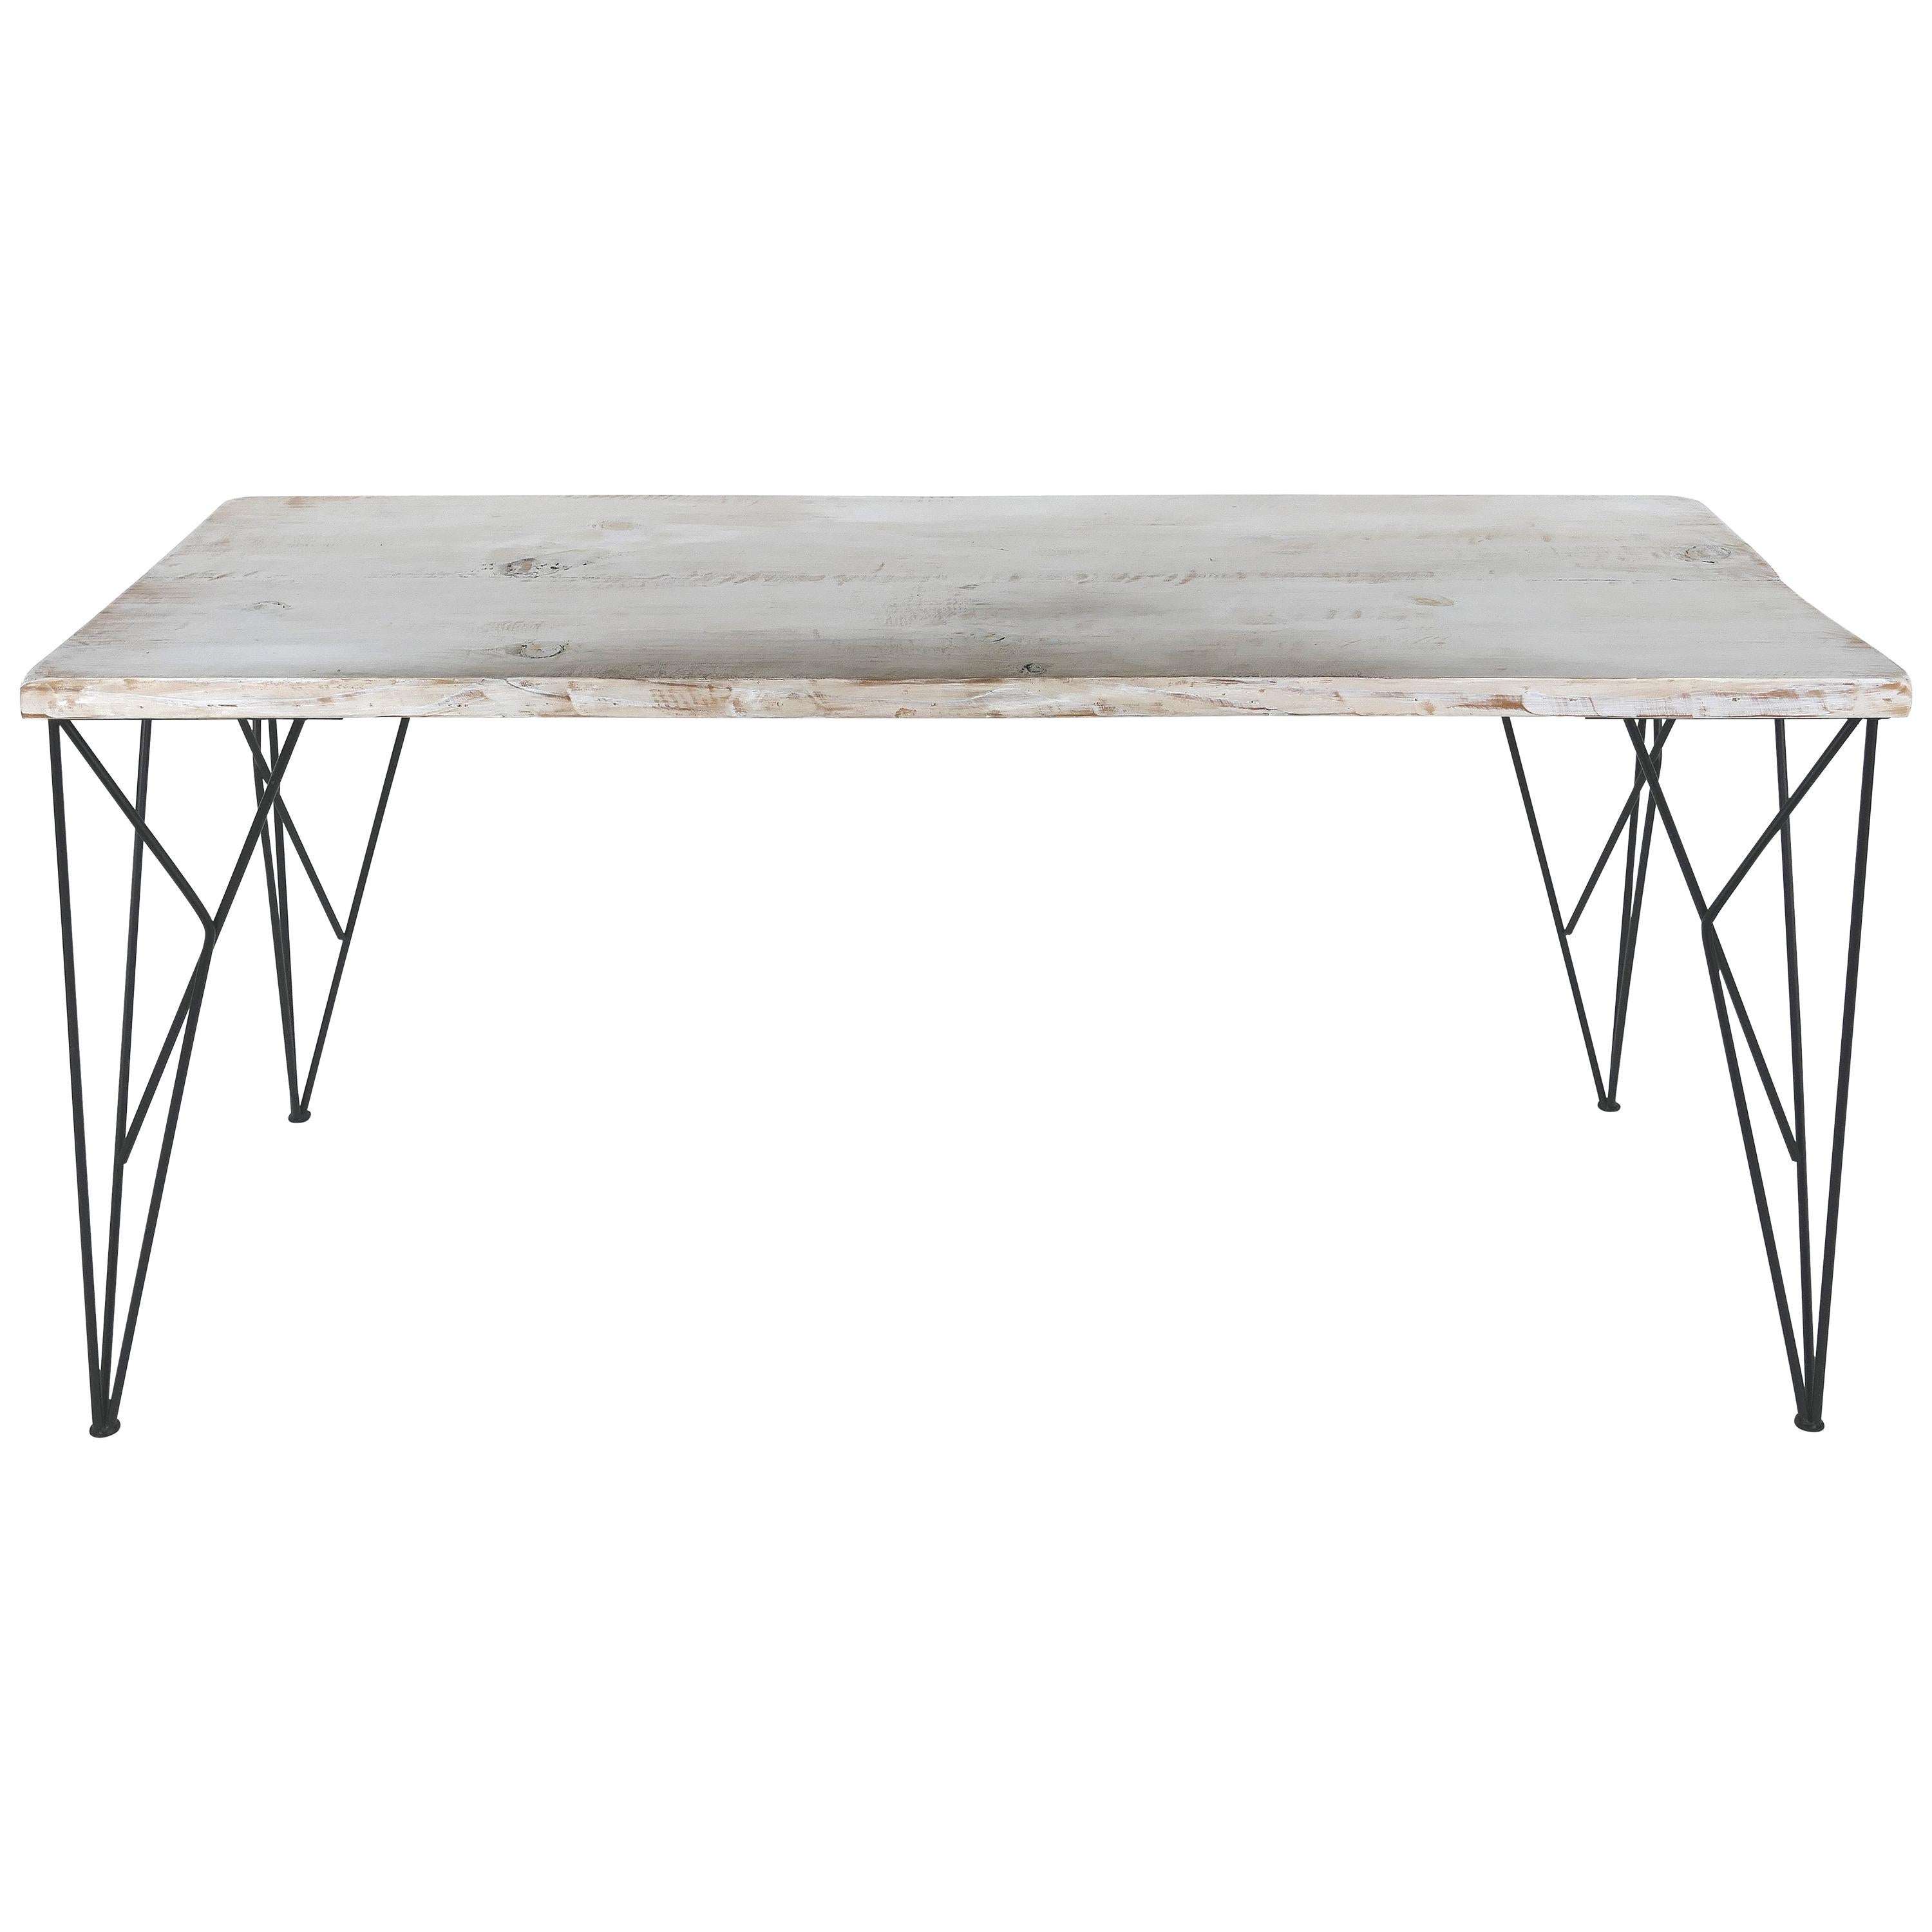 Rustic Whitewashed Console/Work Table with Iron Legs